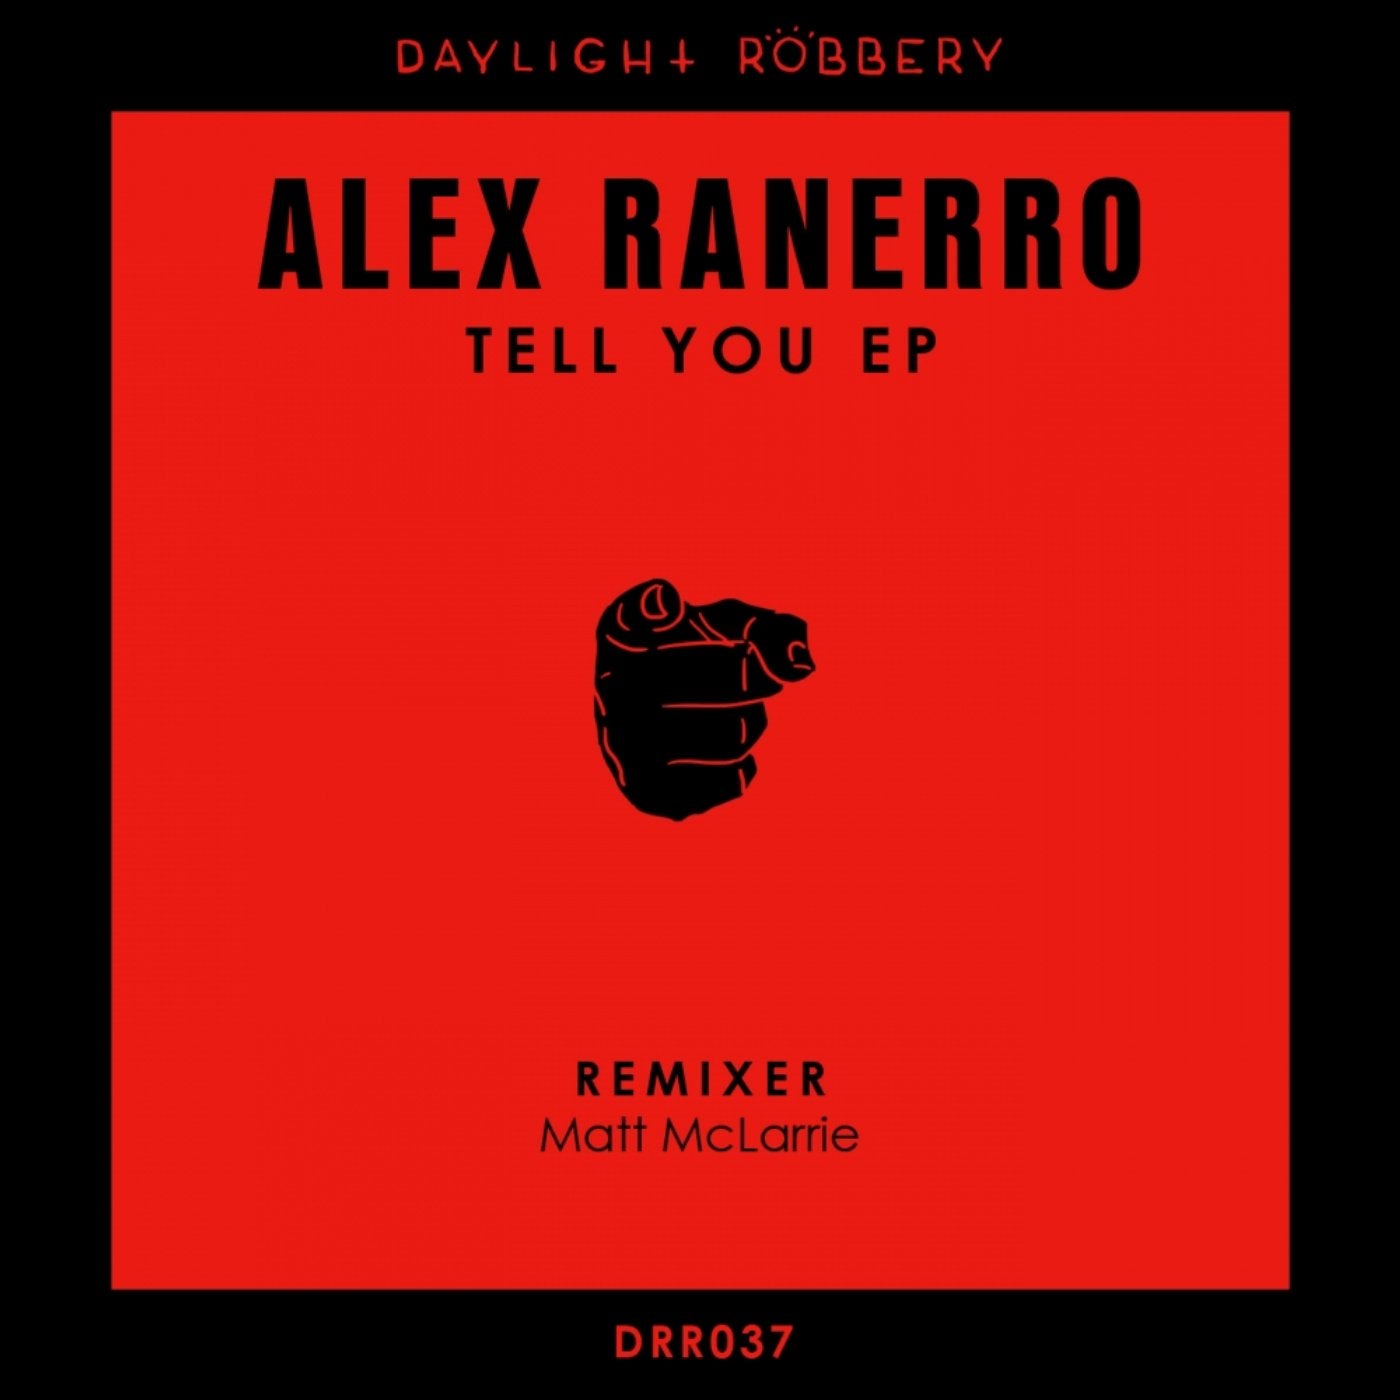 Tell You EP